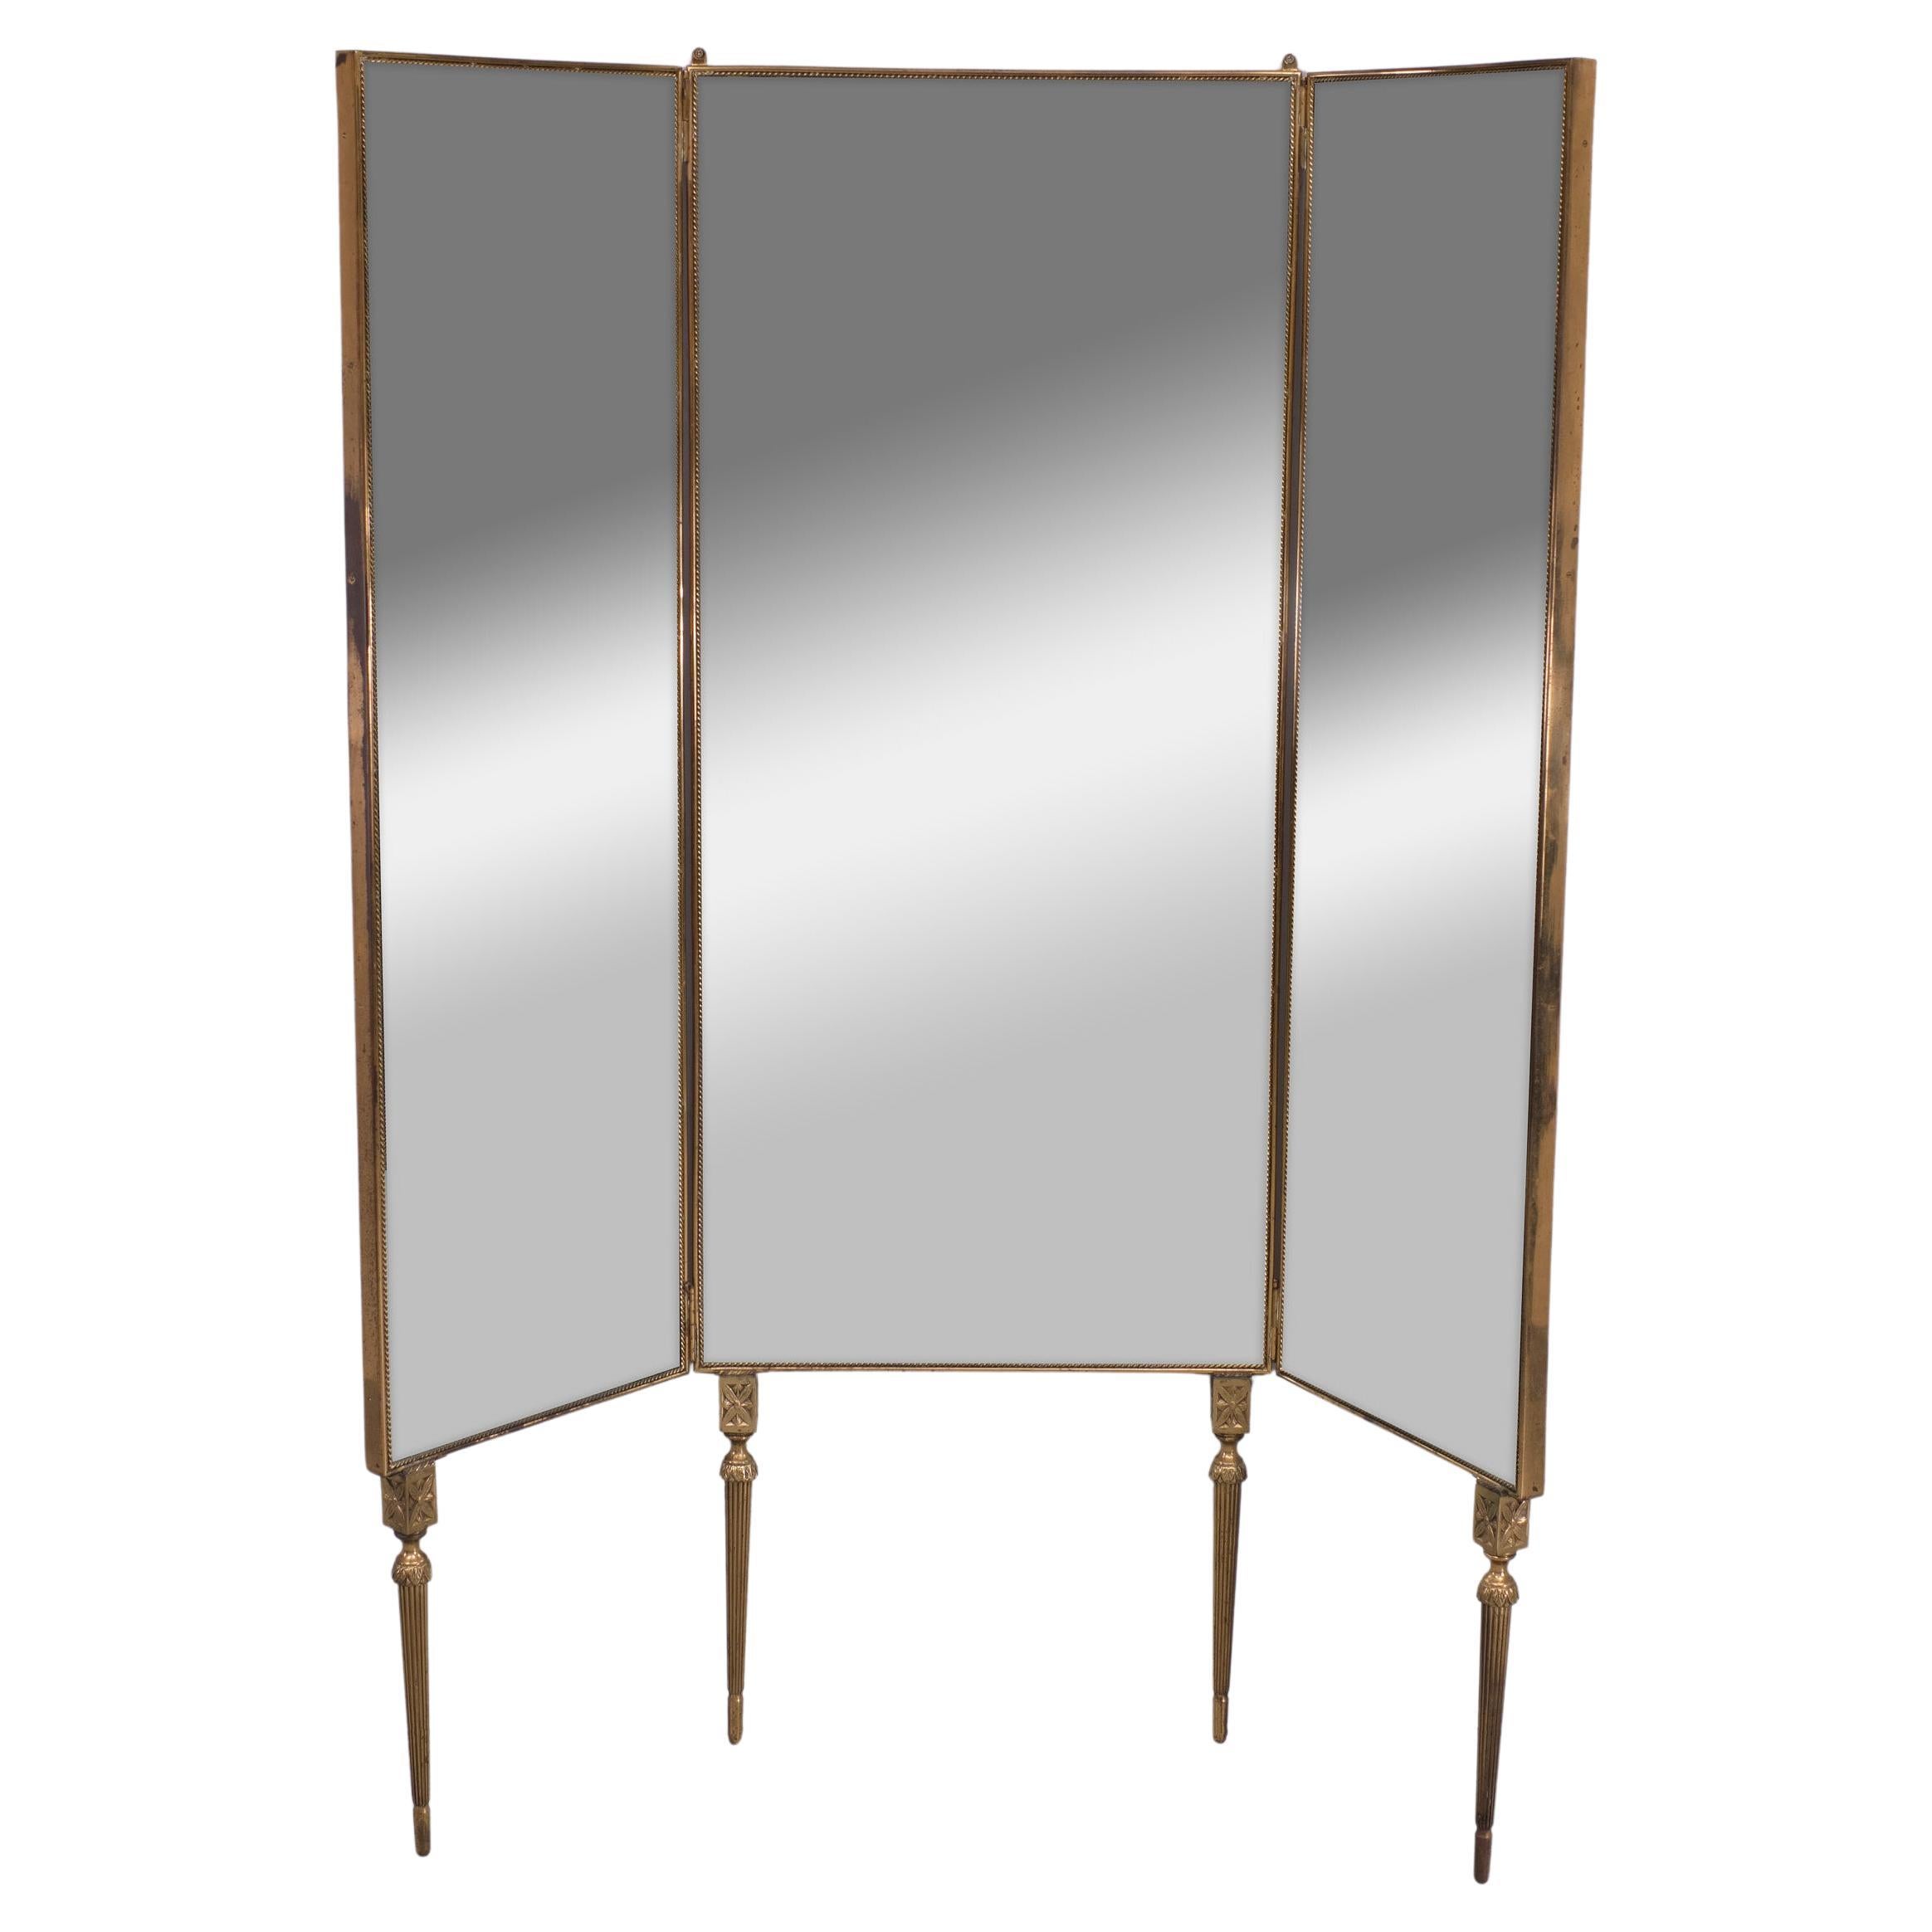 Superb full length folding mirror .Brass frame en legs .The middle section 
attached to the Wall . The side panels are moveable sideways  so you can 
see your side and back, ideal for the real fashionata . Very good quality .
Comes with solid brass